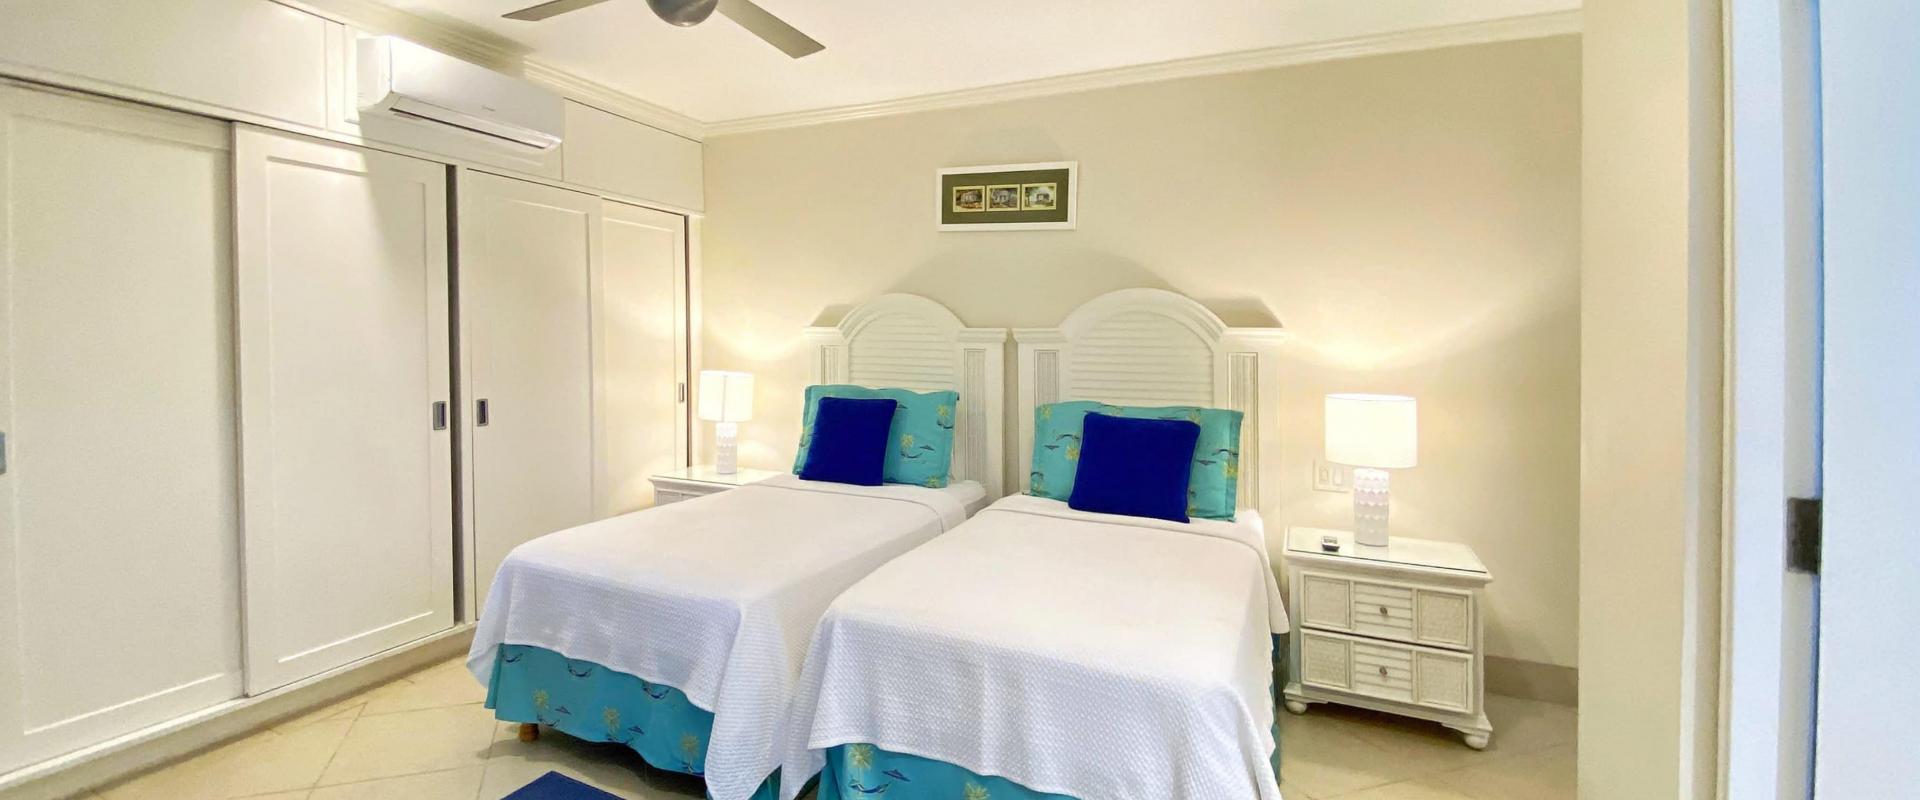 Palm Beach 211 Barbados Beachfront Vacation Condo Rental Bedroom 2 With Two Twin Beds